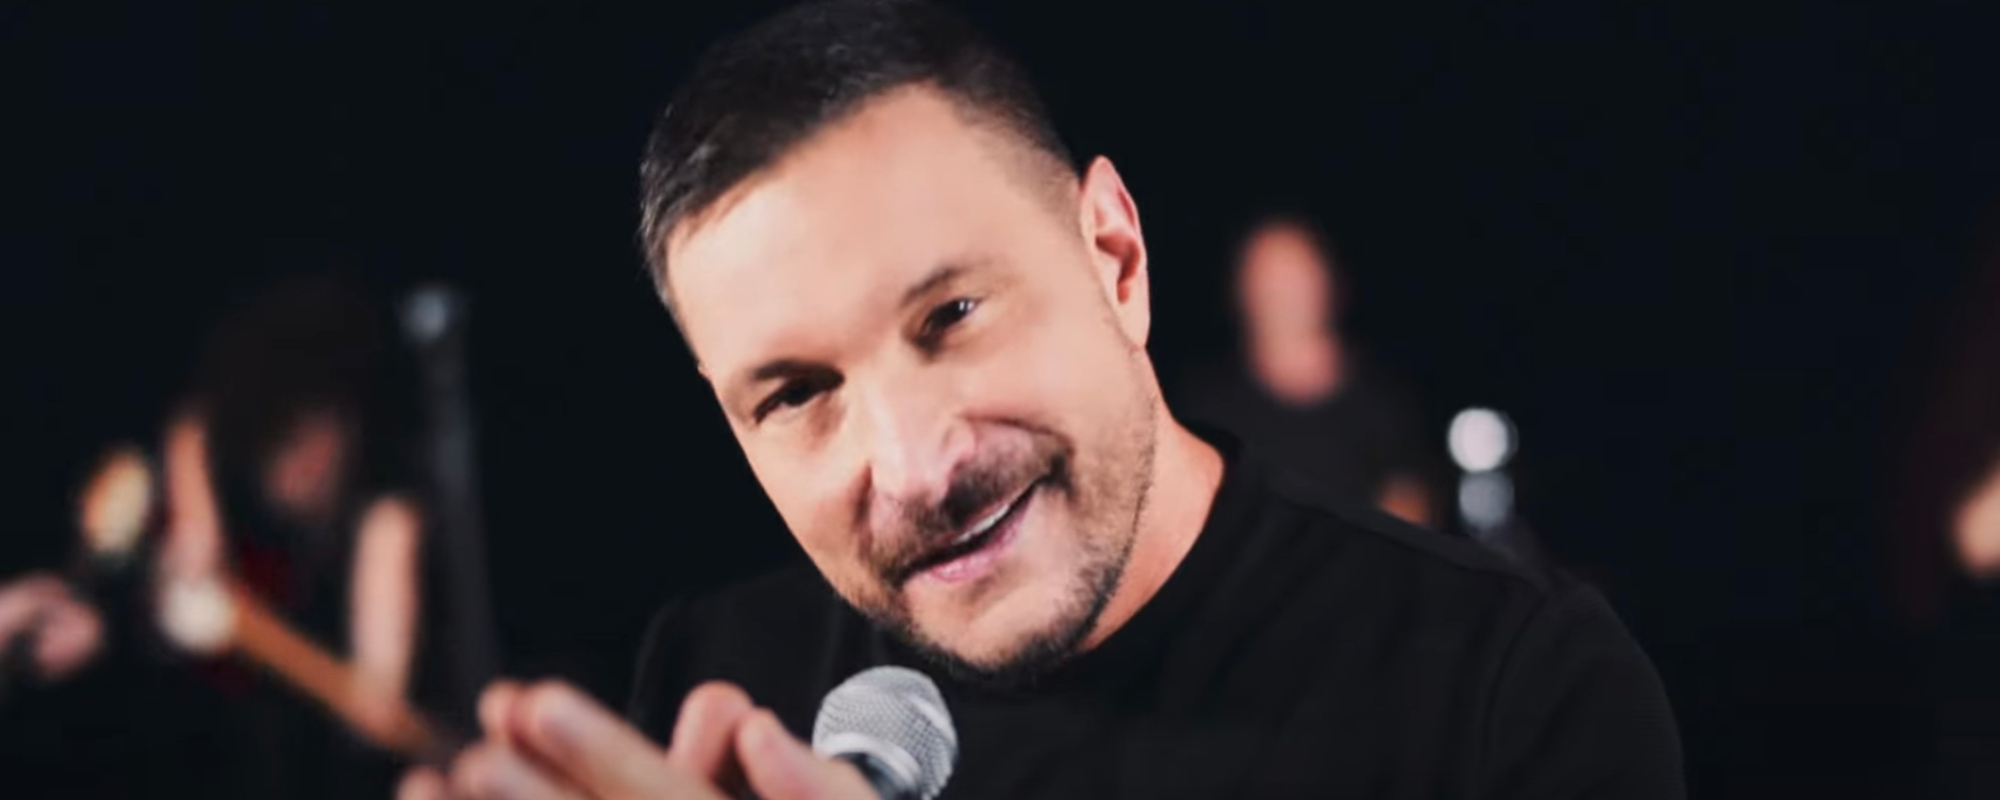 Ty Herndon Perseveres on New Album ‘Jacob’—“I Just Want to Pay My Journey Forward”